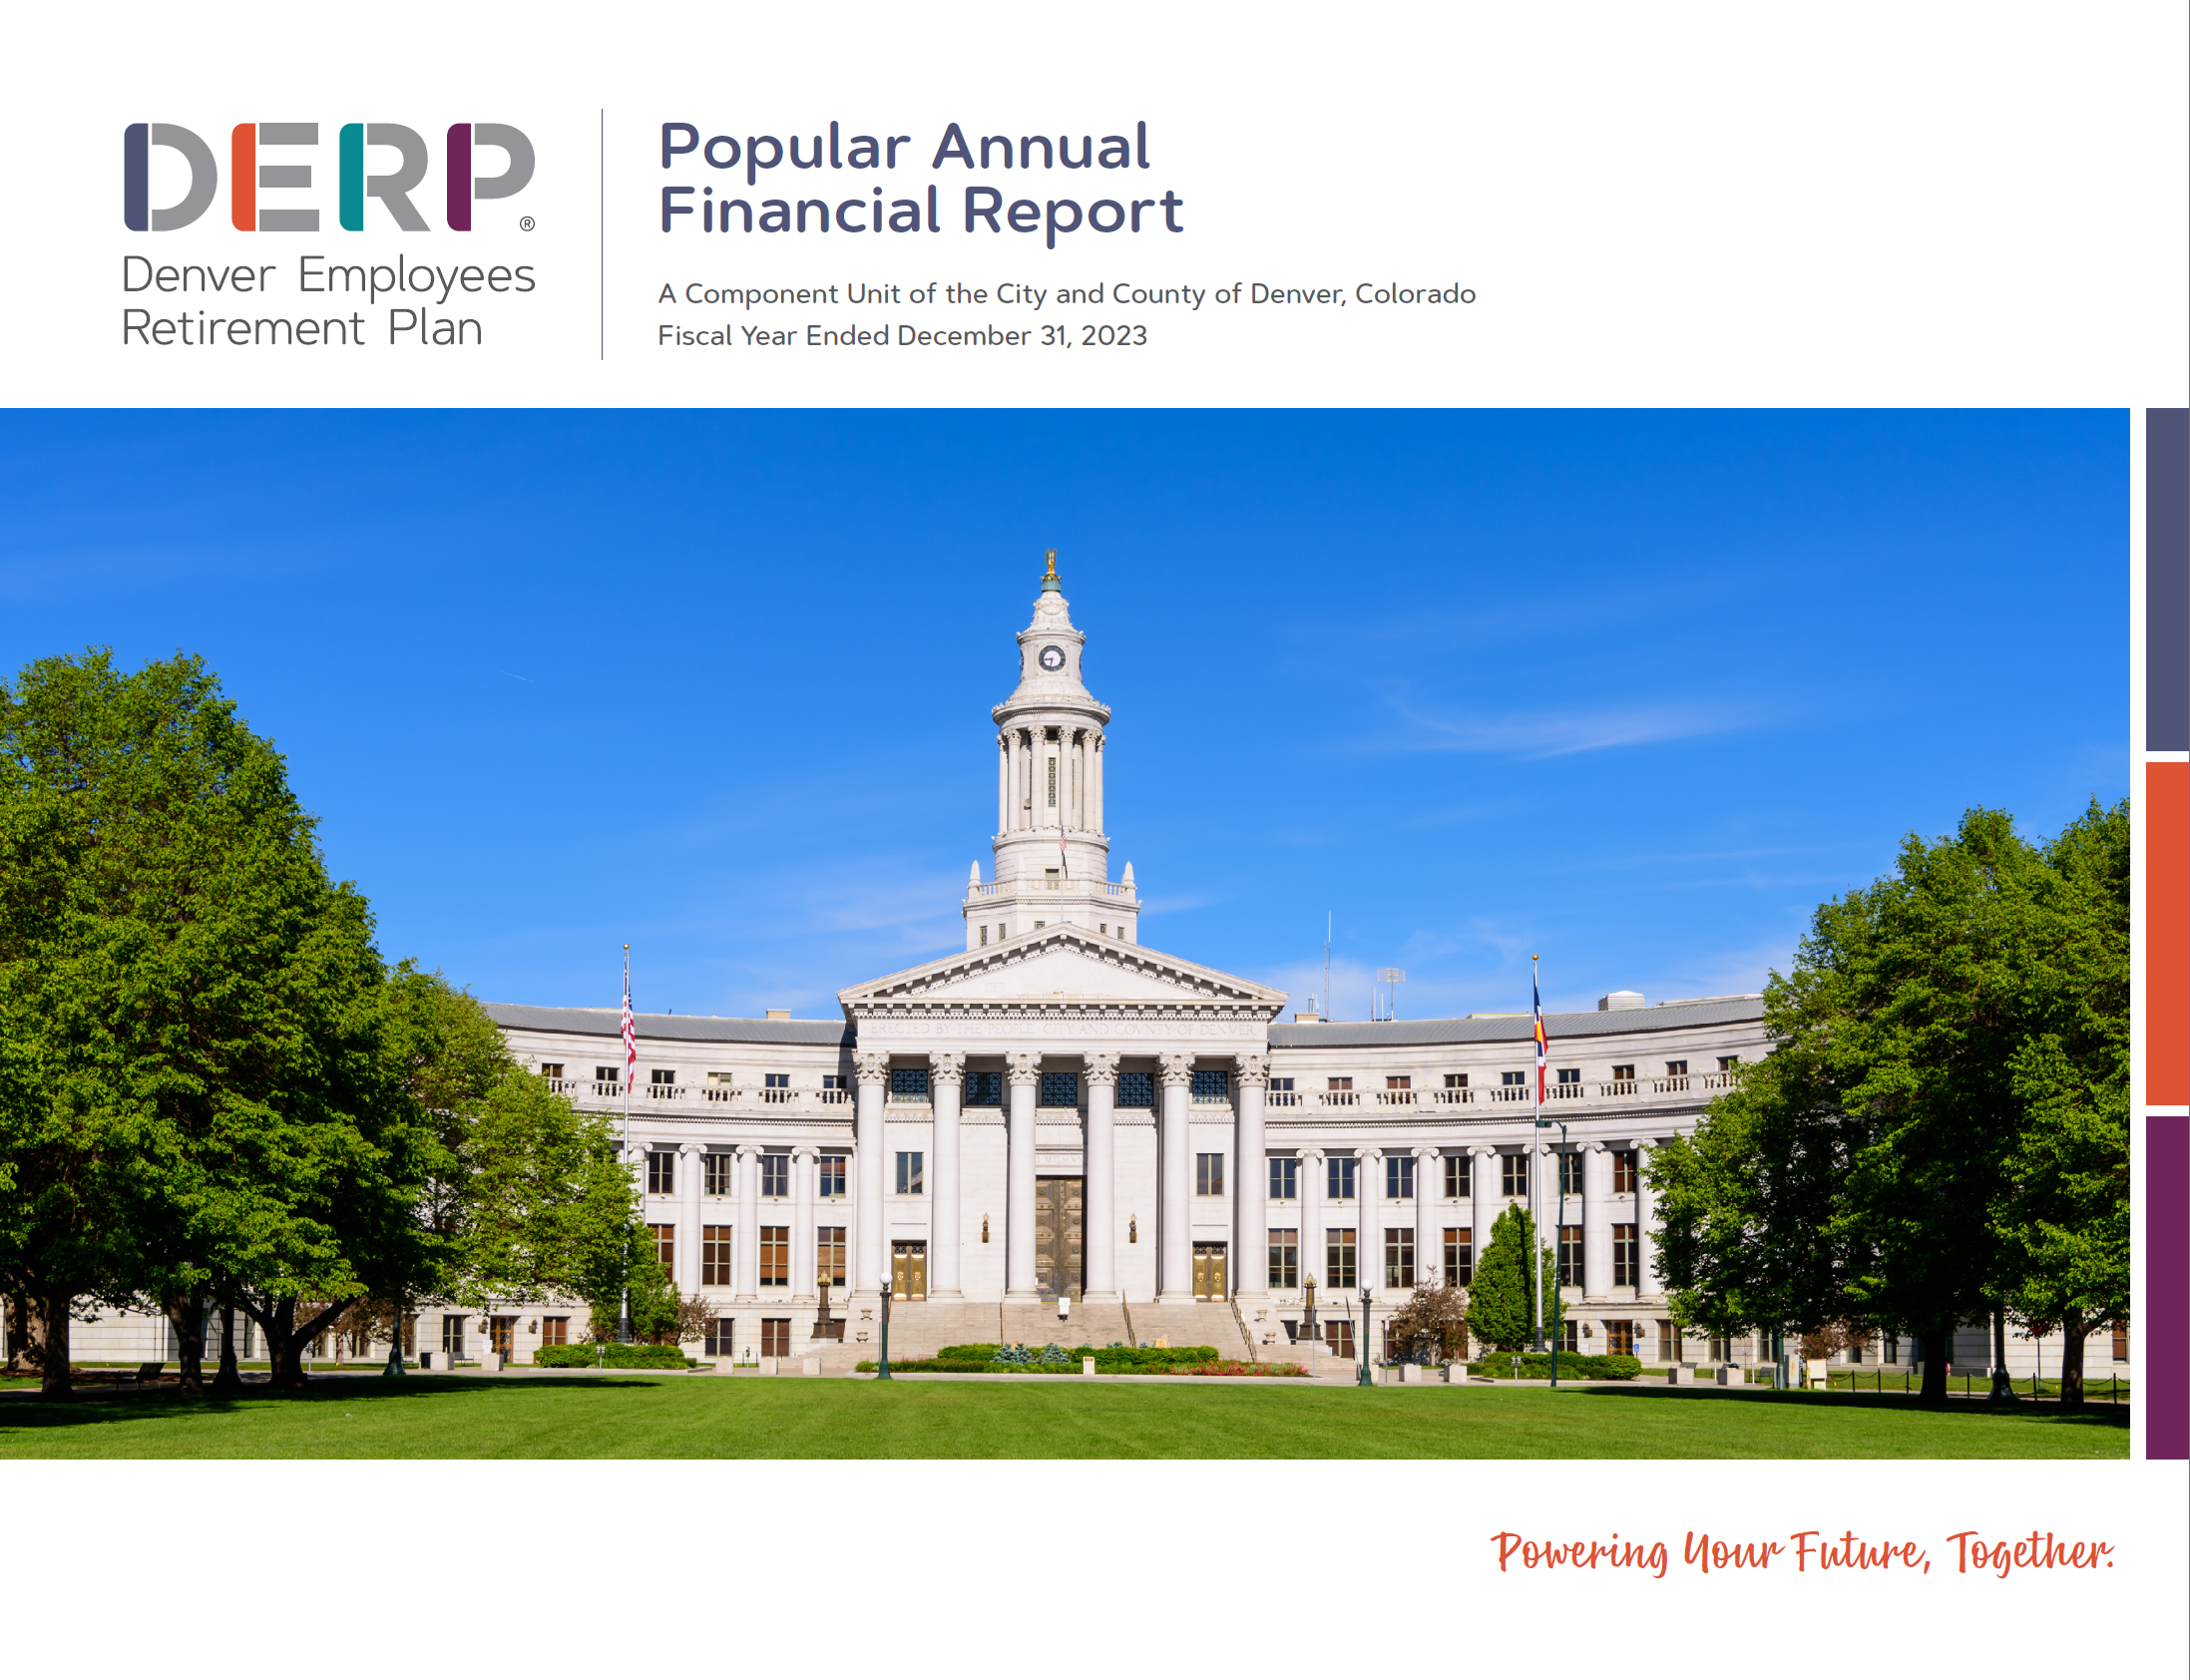 The cover to the DERP 2023 Popular Annual Financial Report show the City and County of Denver building on a sunny spring day. The DERP logo colors are on the right, and the tagline "Powering Futures Together" is at the bottom.